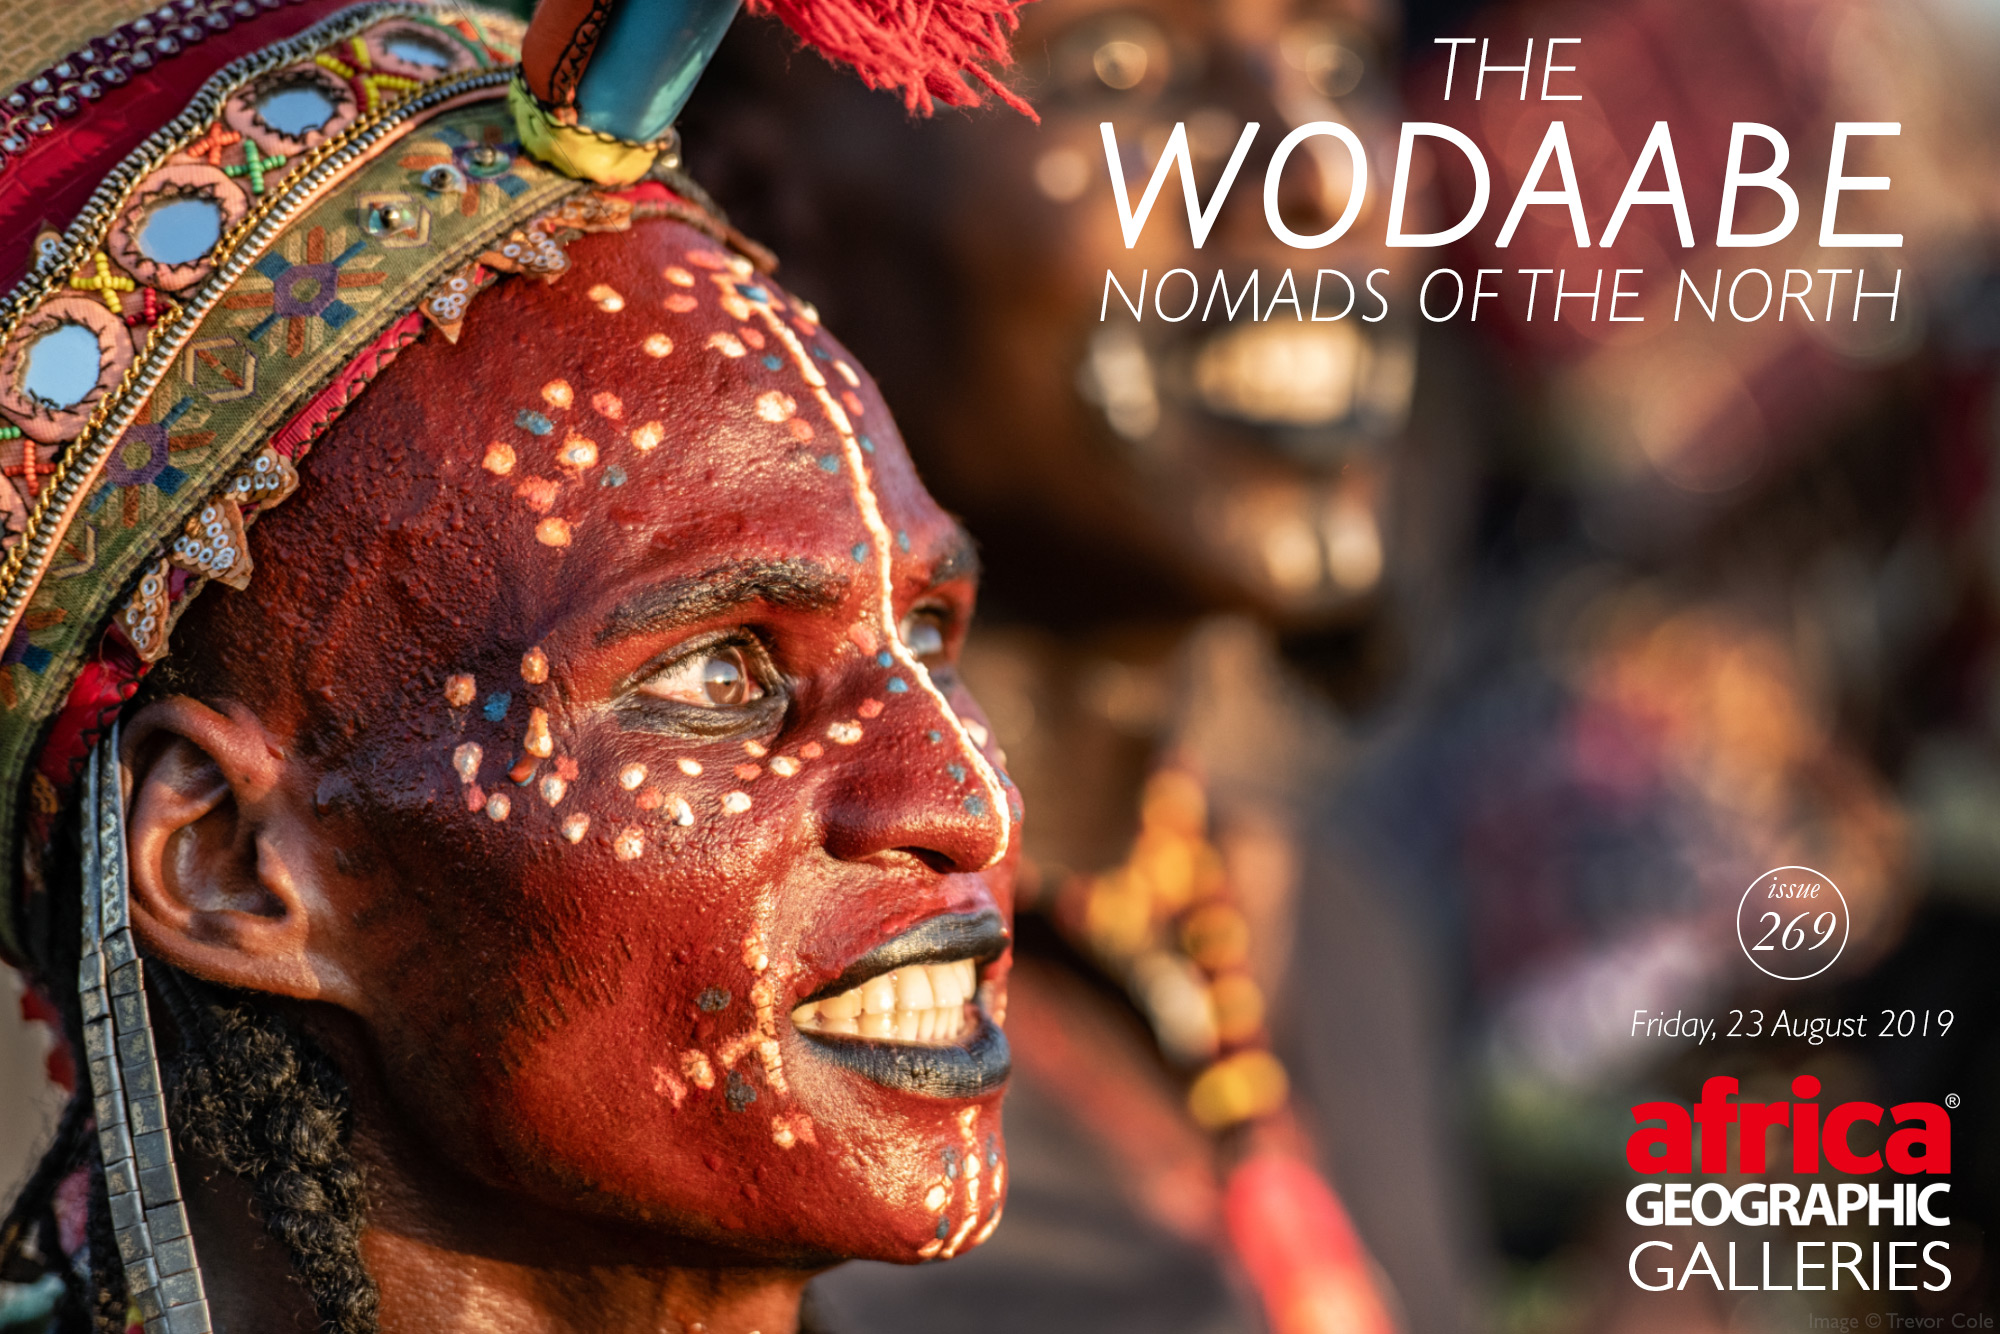 The Wodaabe Nomads Of The North Africa Geographic